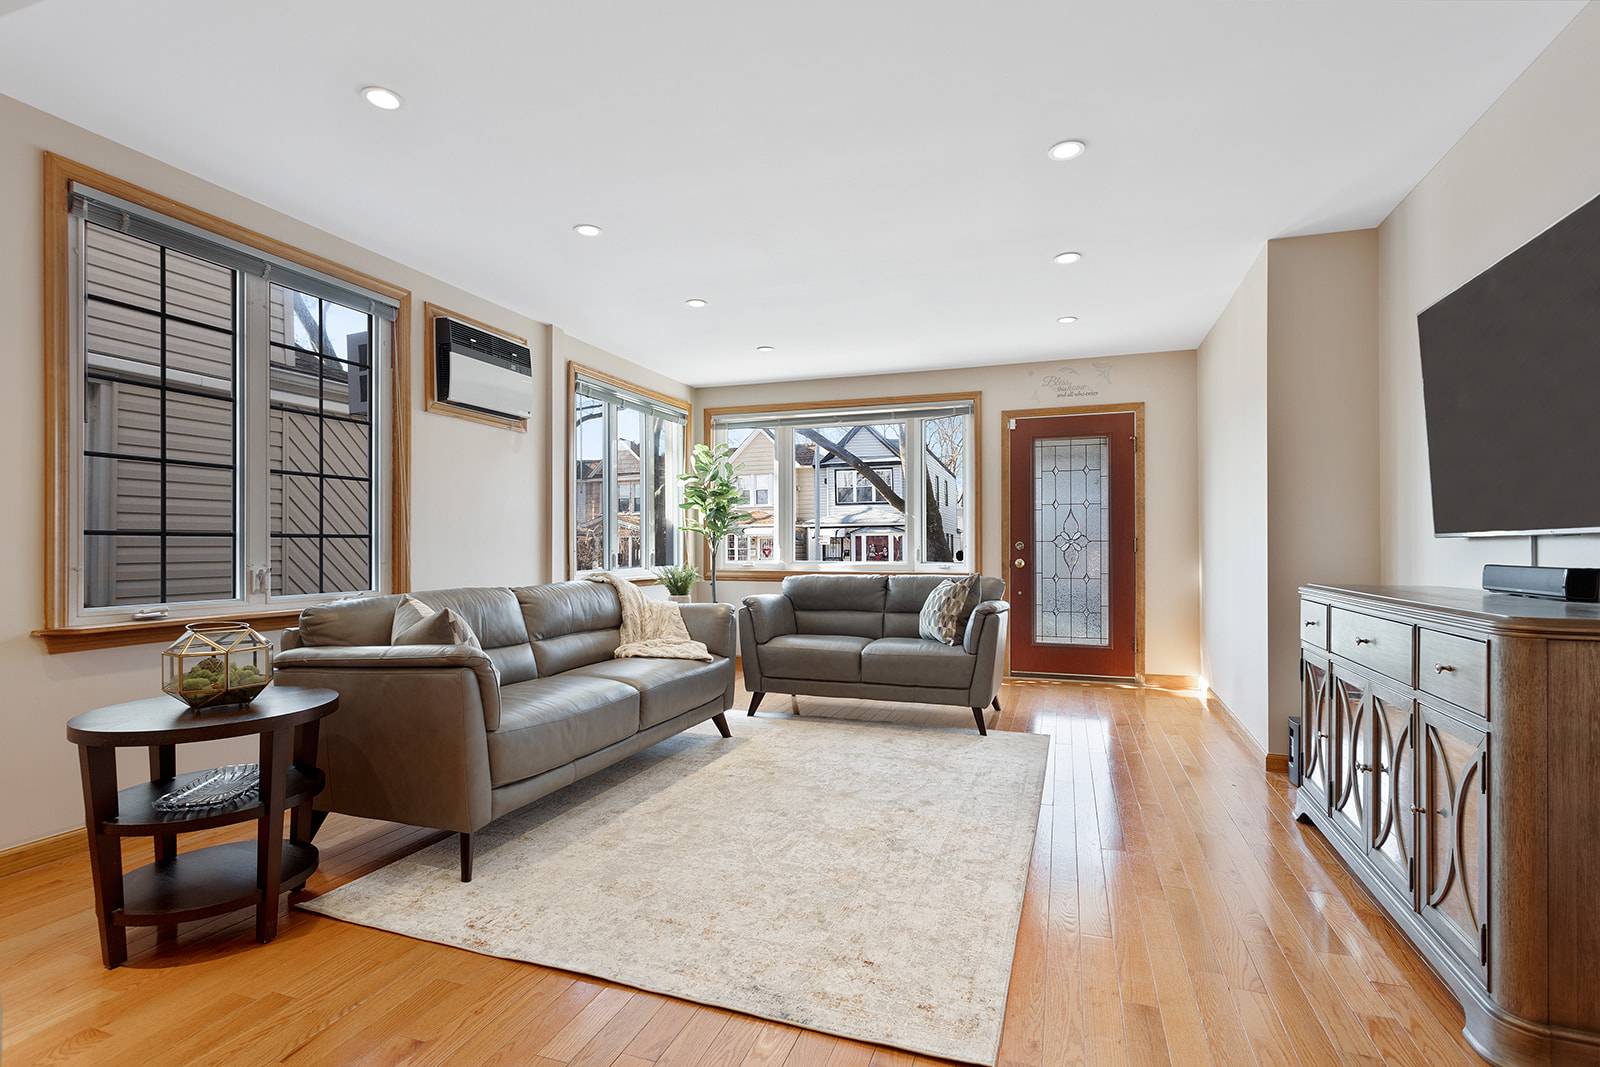 Welcome to 6931 67 St, a beautifully renovated single family home in Glendale, Queens.